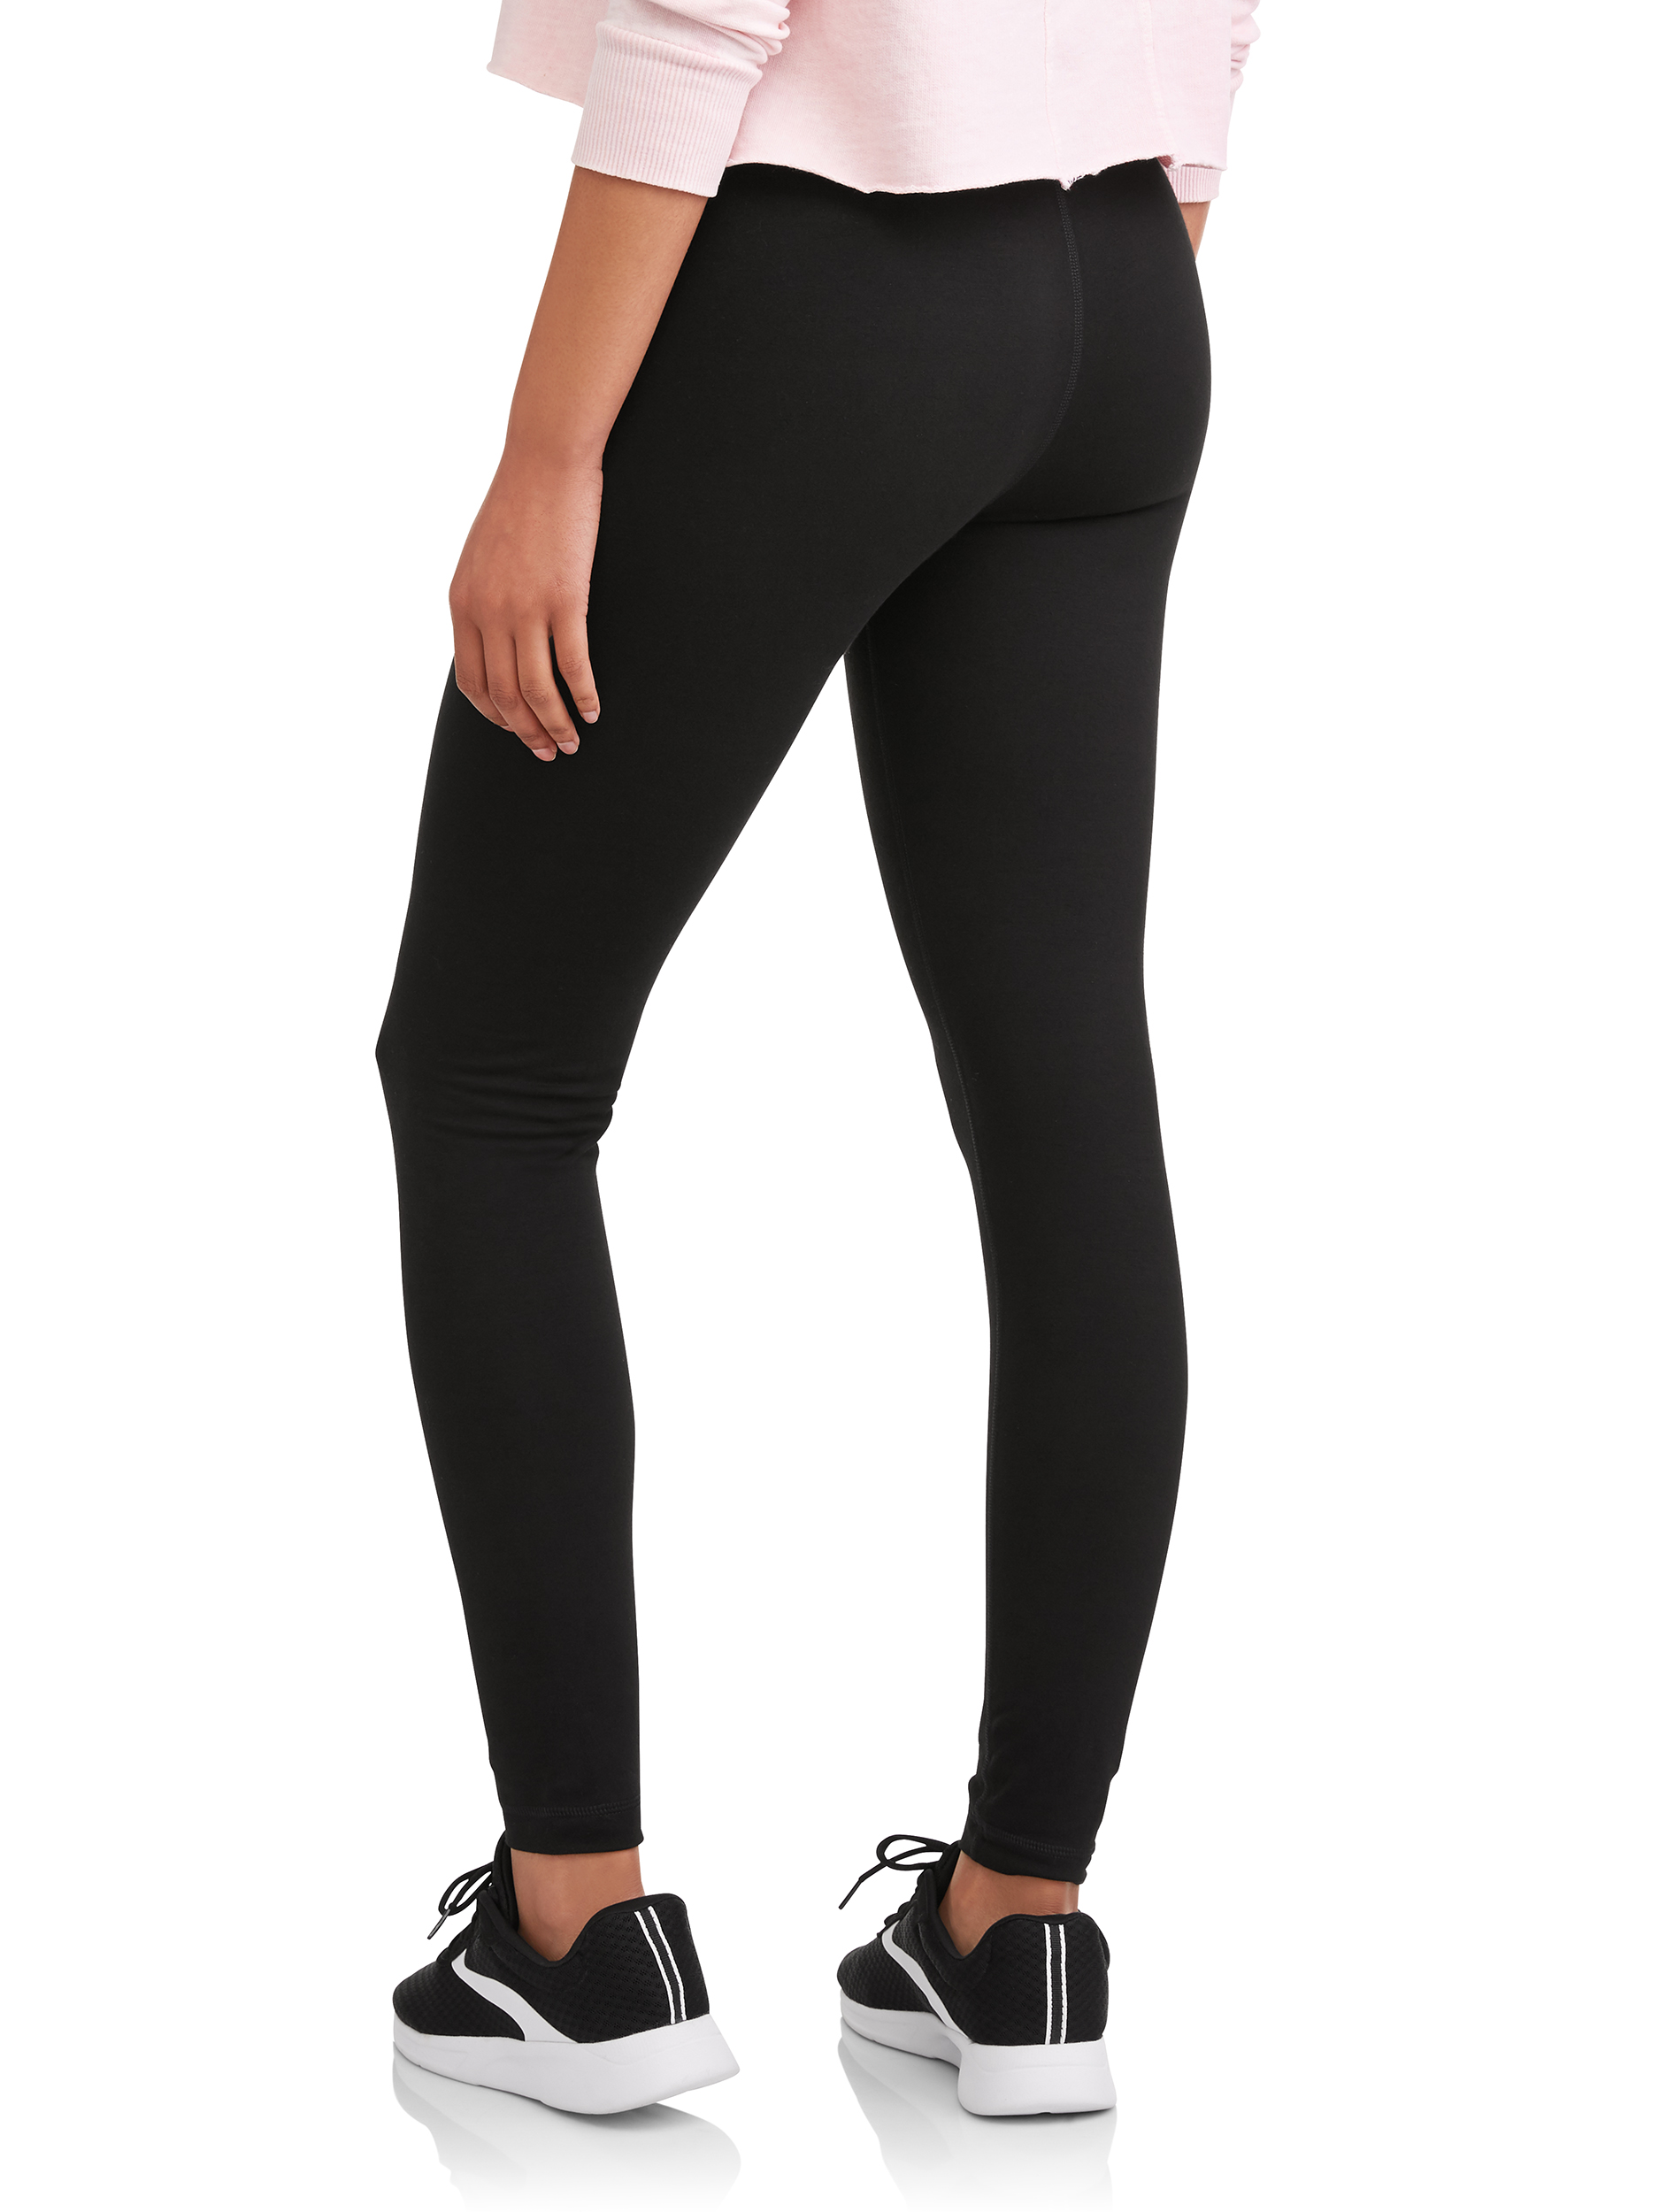 Athletic Works Women's Active Fit Mid Rise Leggings, Sizes S-XXL - image 4 of 4